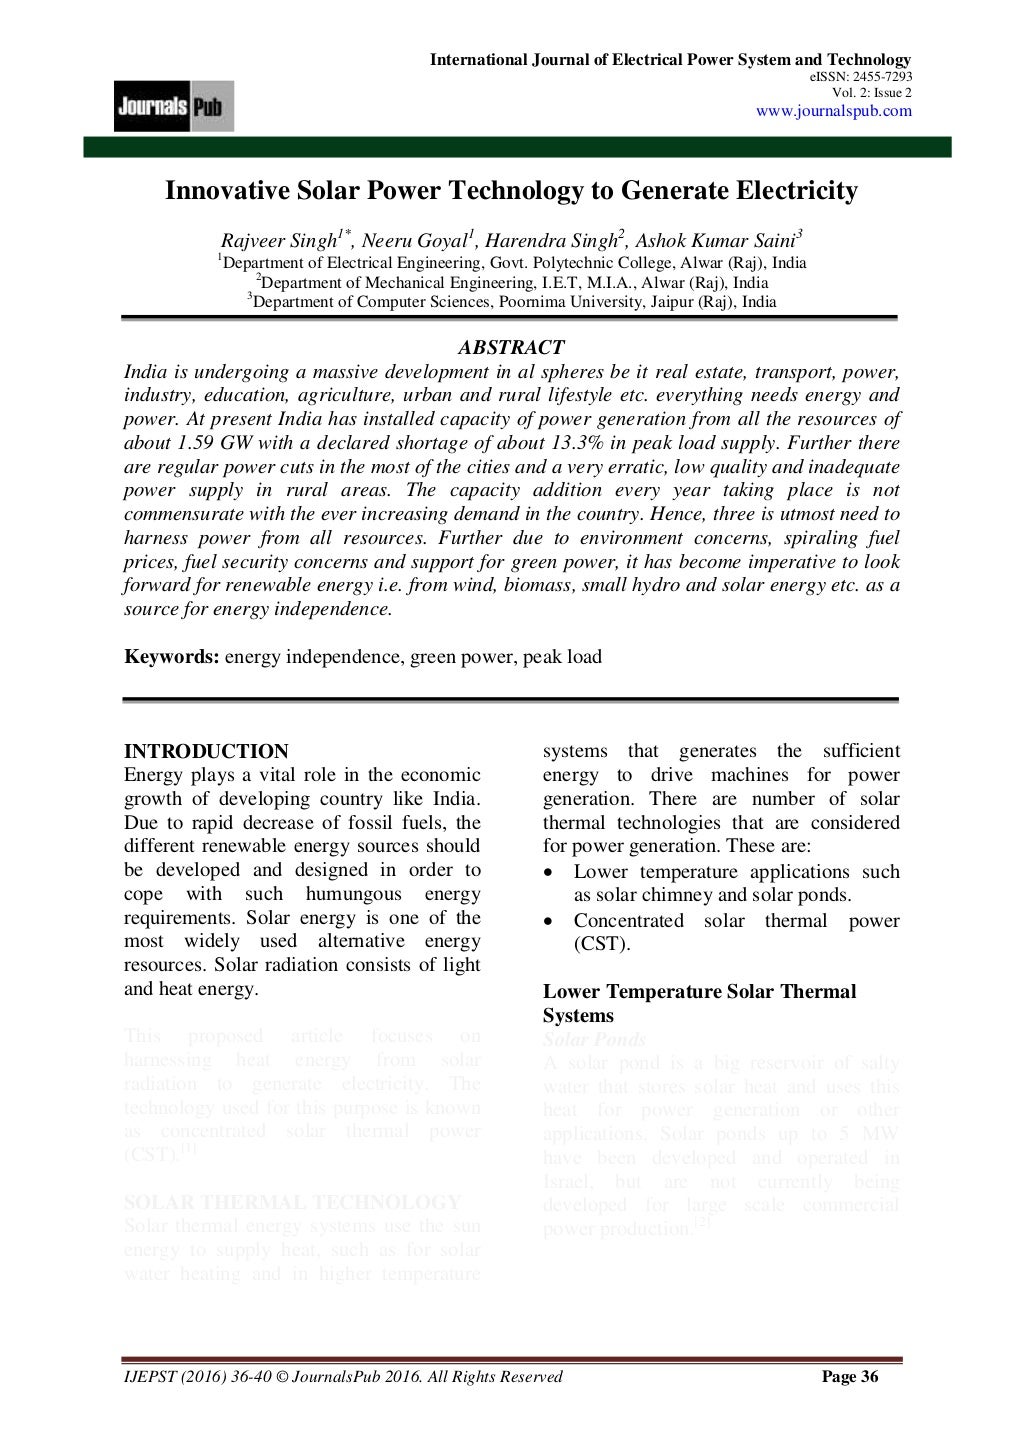 International Journal of Electrical Power System and Technology (Vol